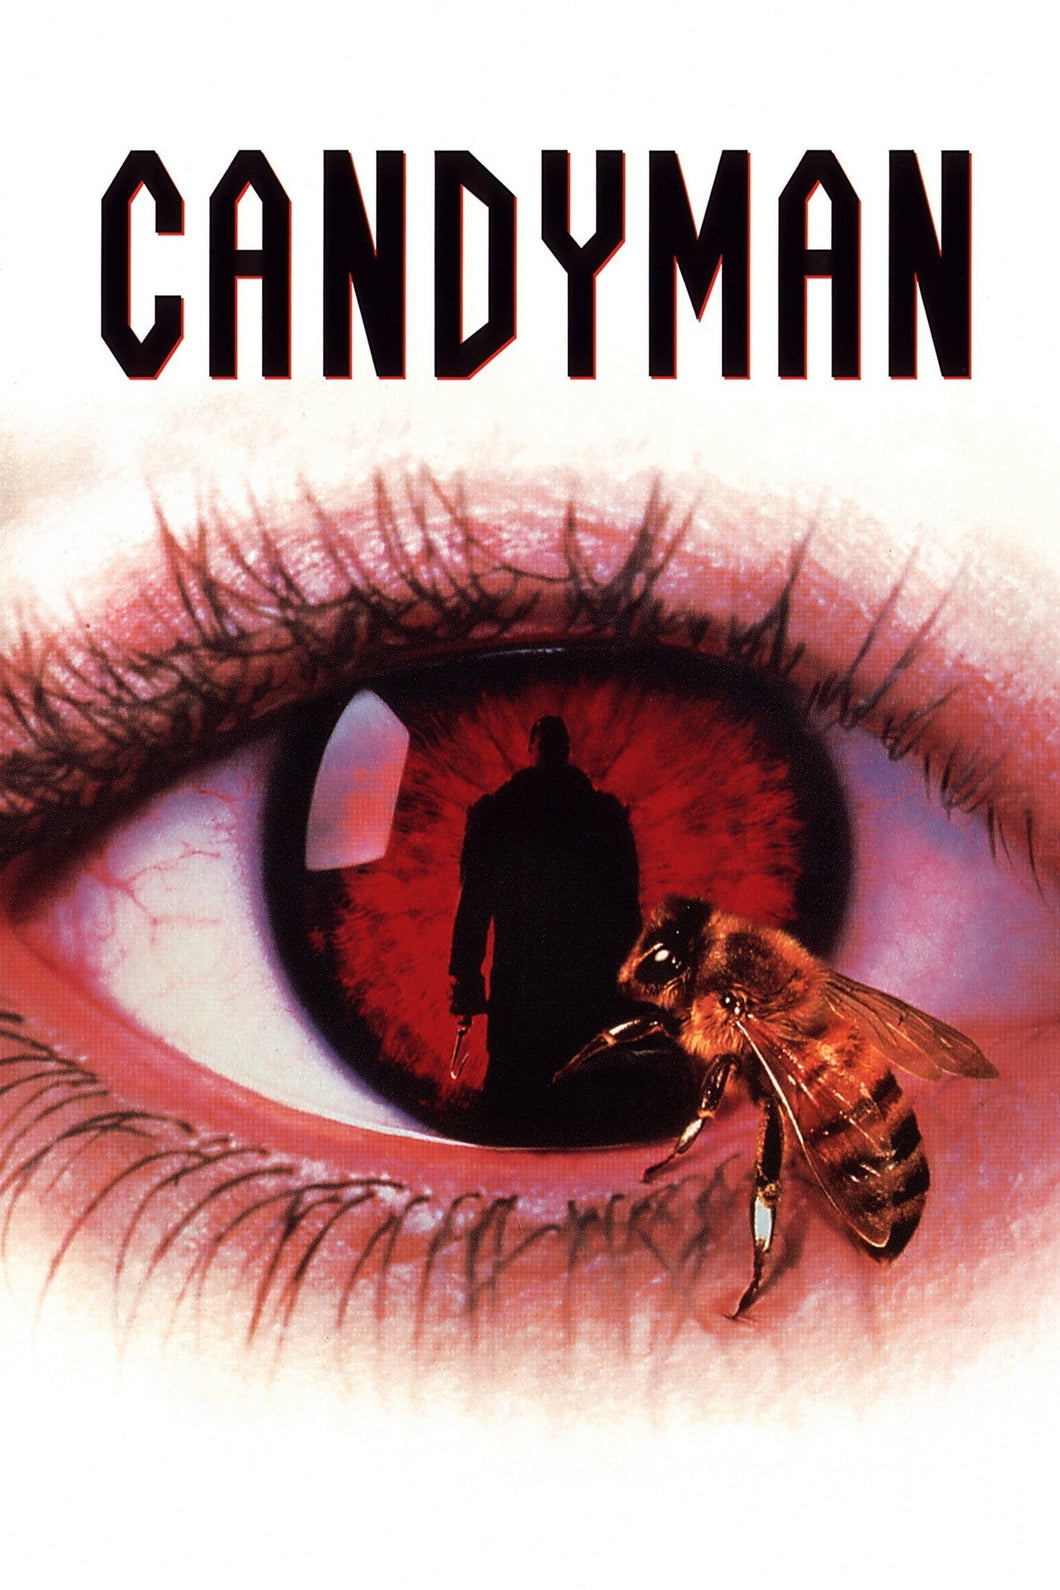 Candyman (1992) Movie Poster High Quality Glossy Paper A1 A2 A3 A4 A3 Framed or Unframed!!!